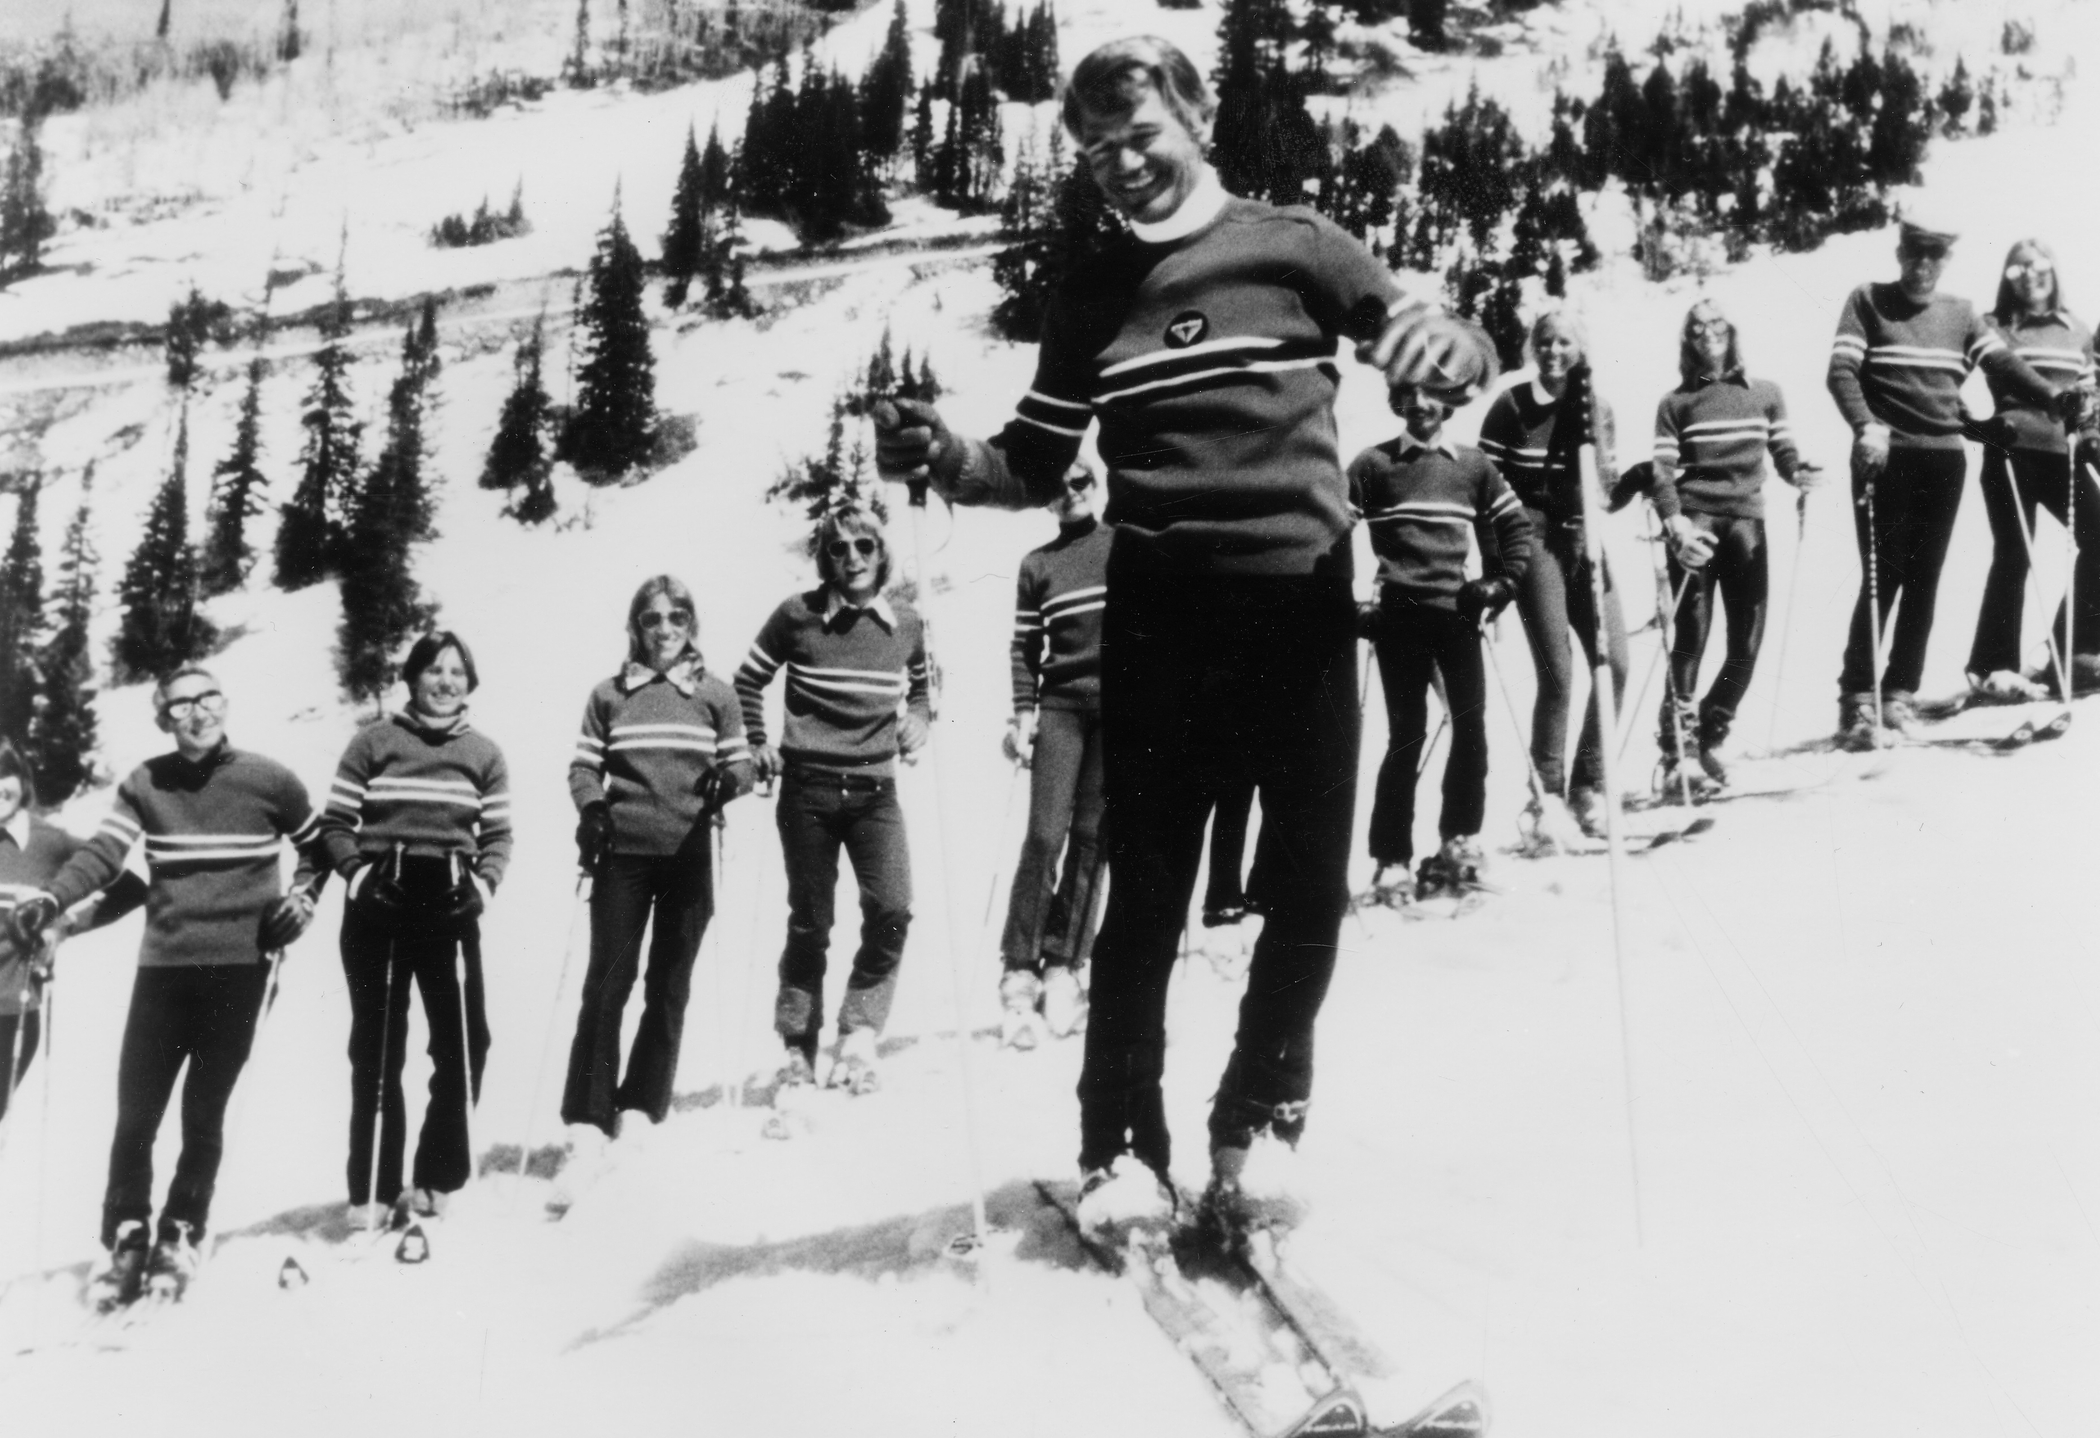 Junior Bounous with ski school back in the mid 1970's